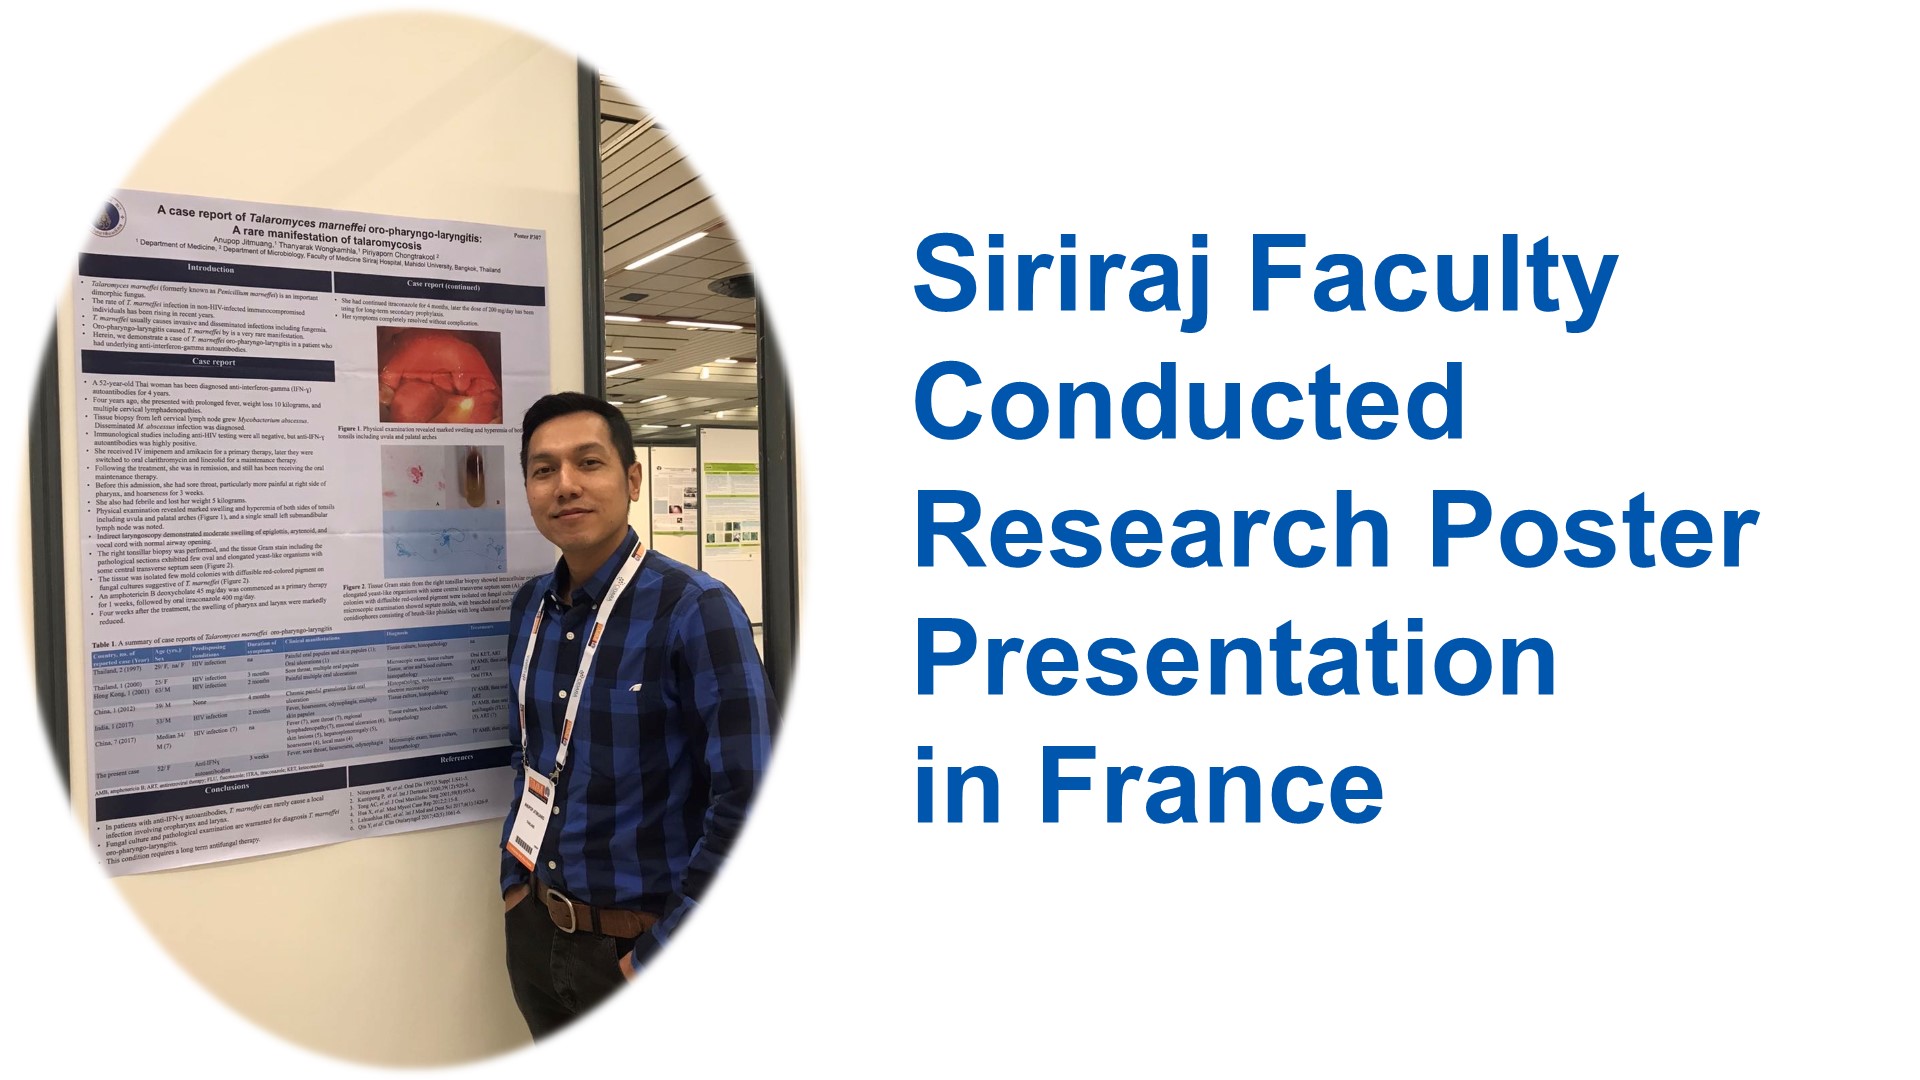 Siriraj Faculty Conducted a Research Poster Presentation in France